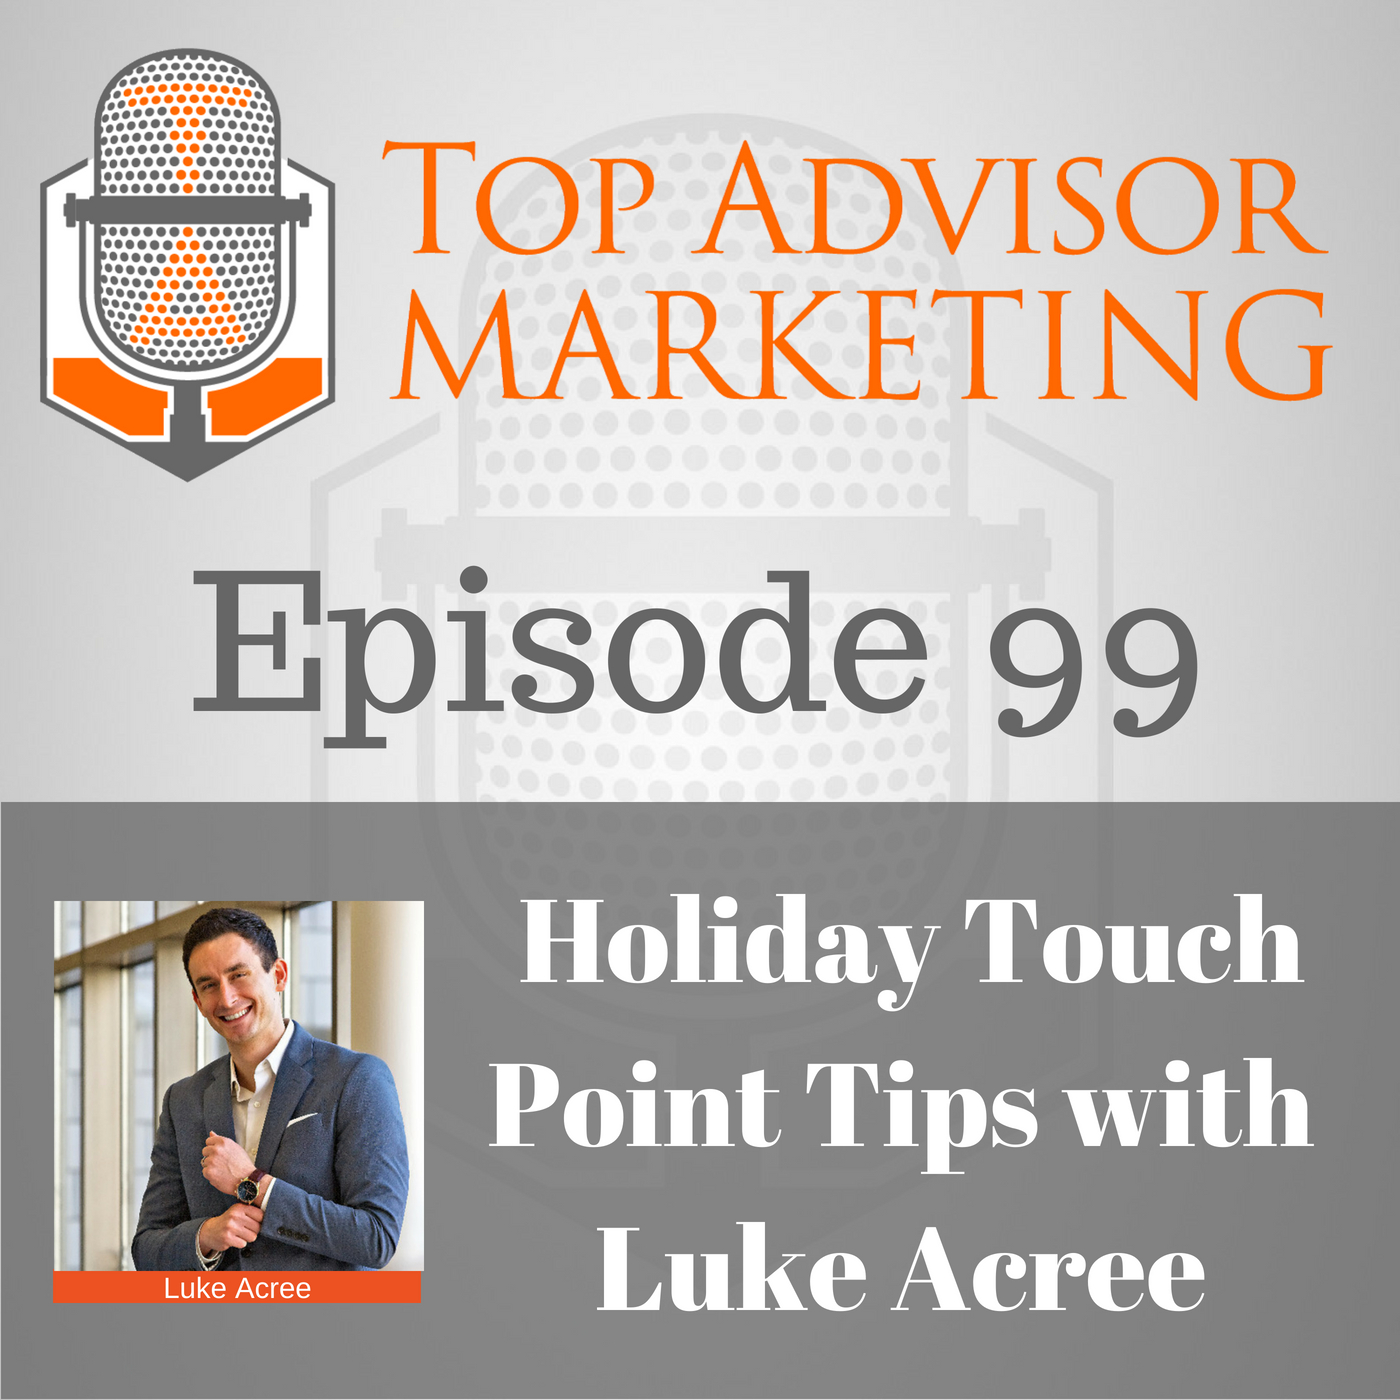 Episode 99 - Holiday Touch Point Tips with Luke Acree